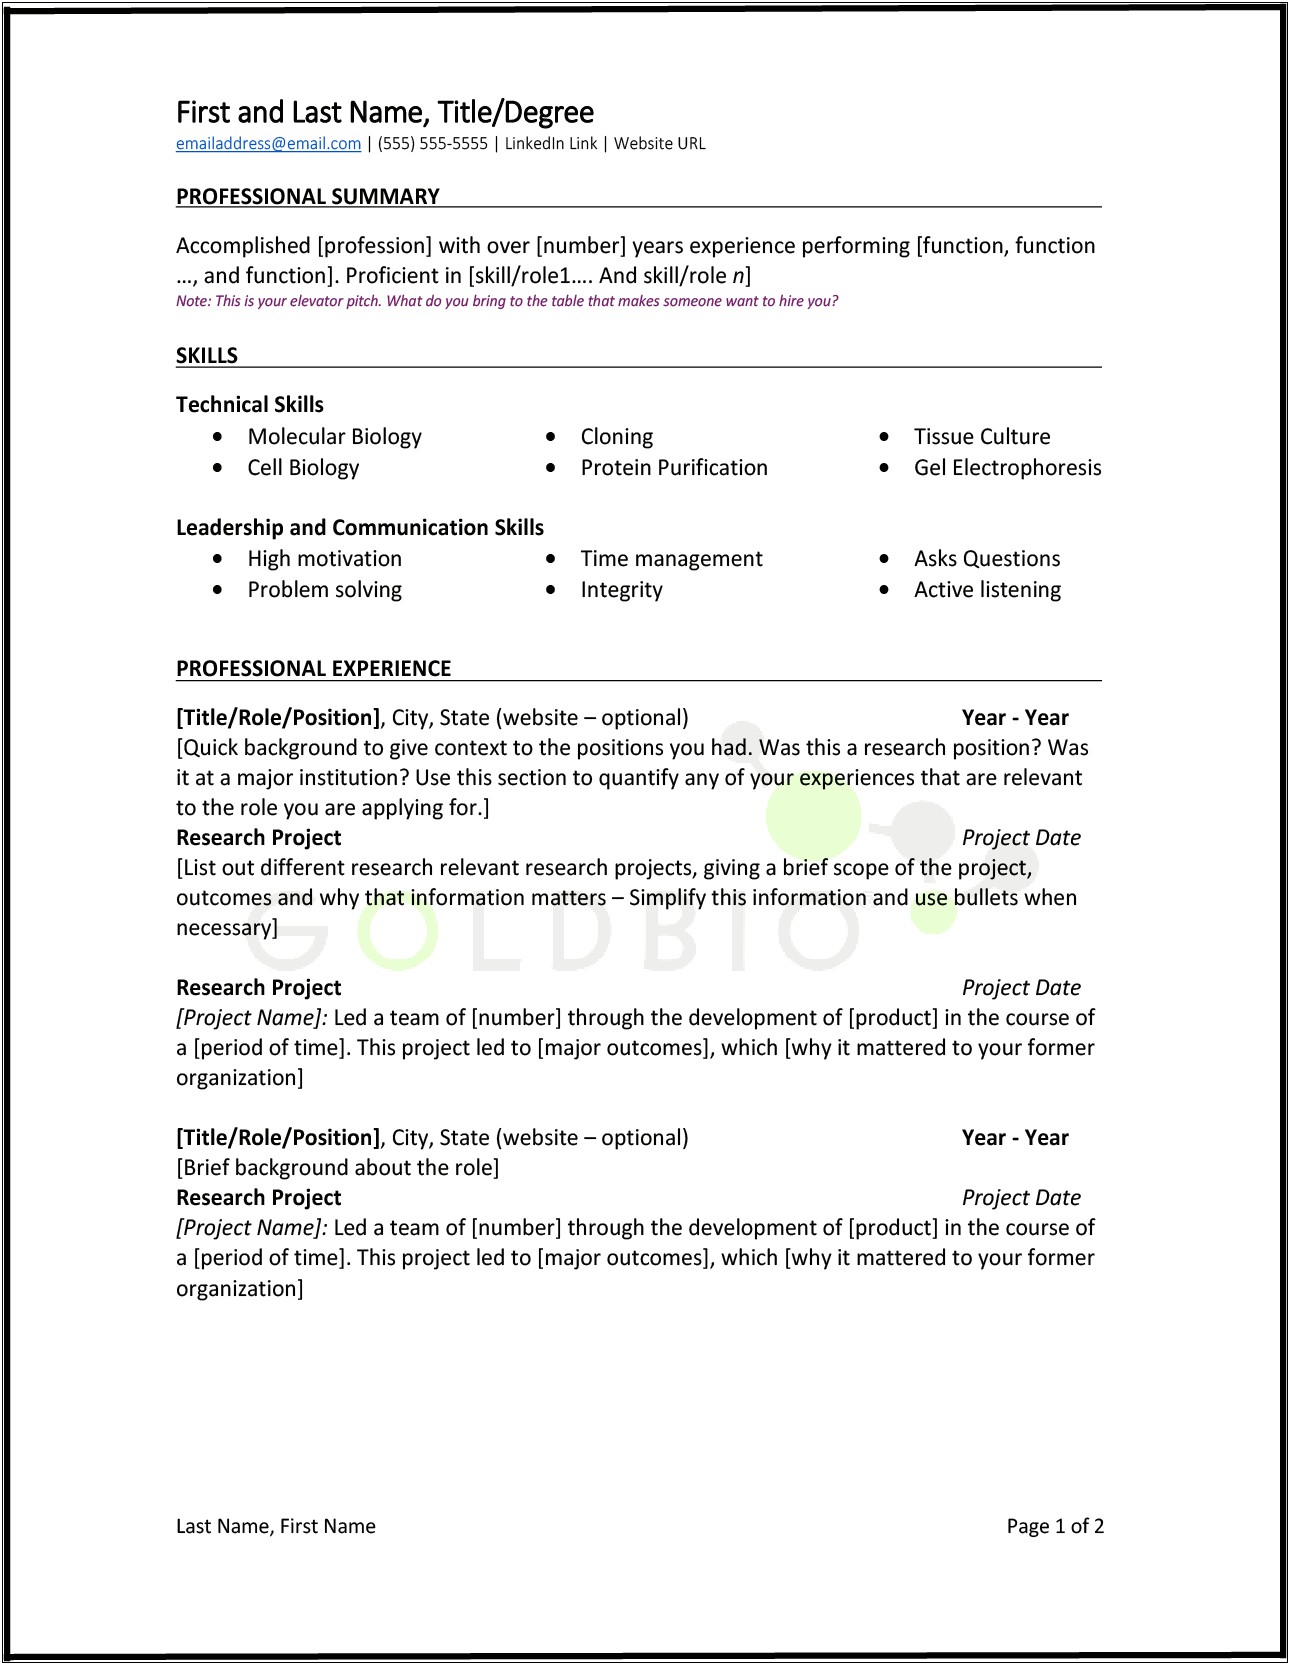 Lead With Job Titles Or Company On Resume